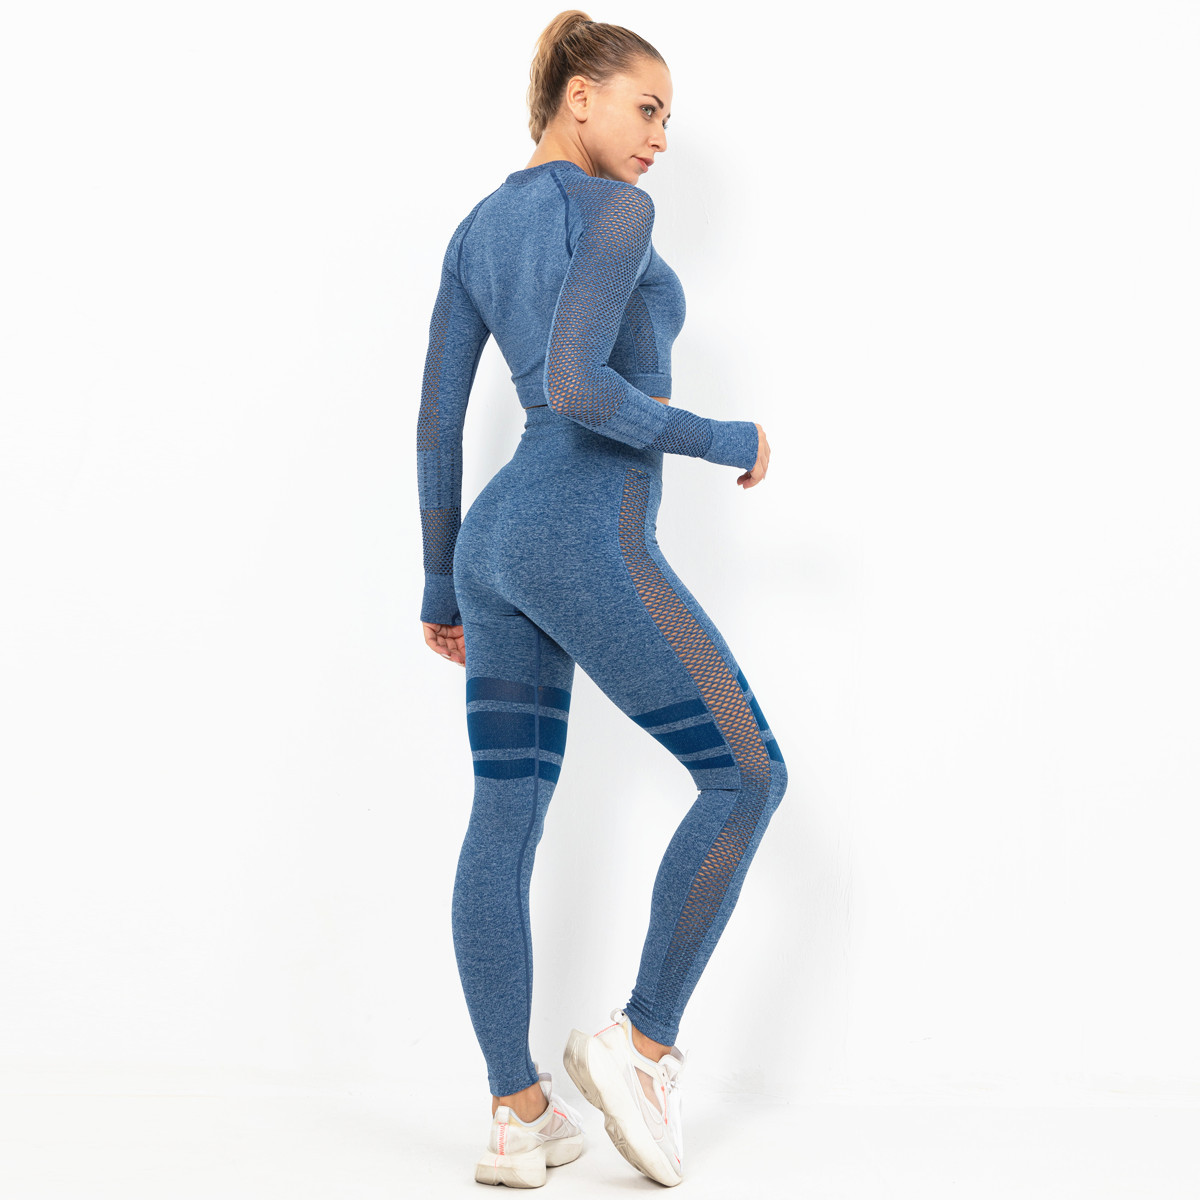 tight-fitting hip pants slim long-sleeved two-piece yoga suit NSLX8981